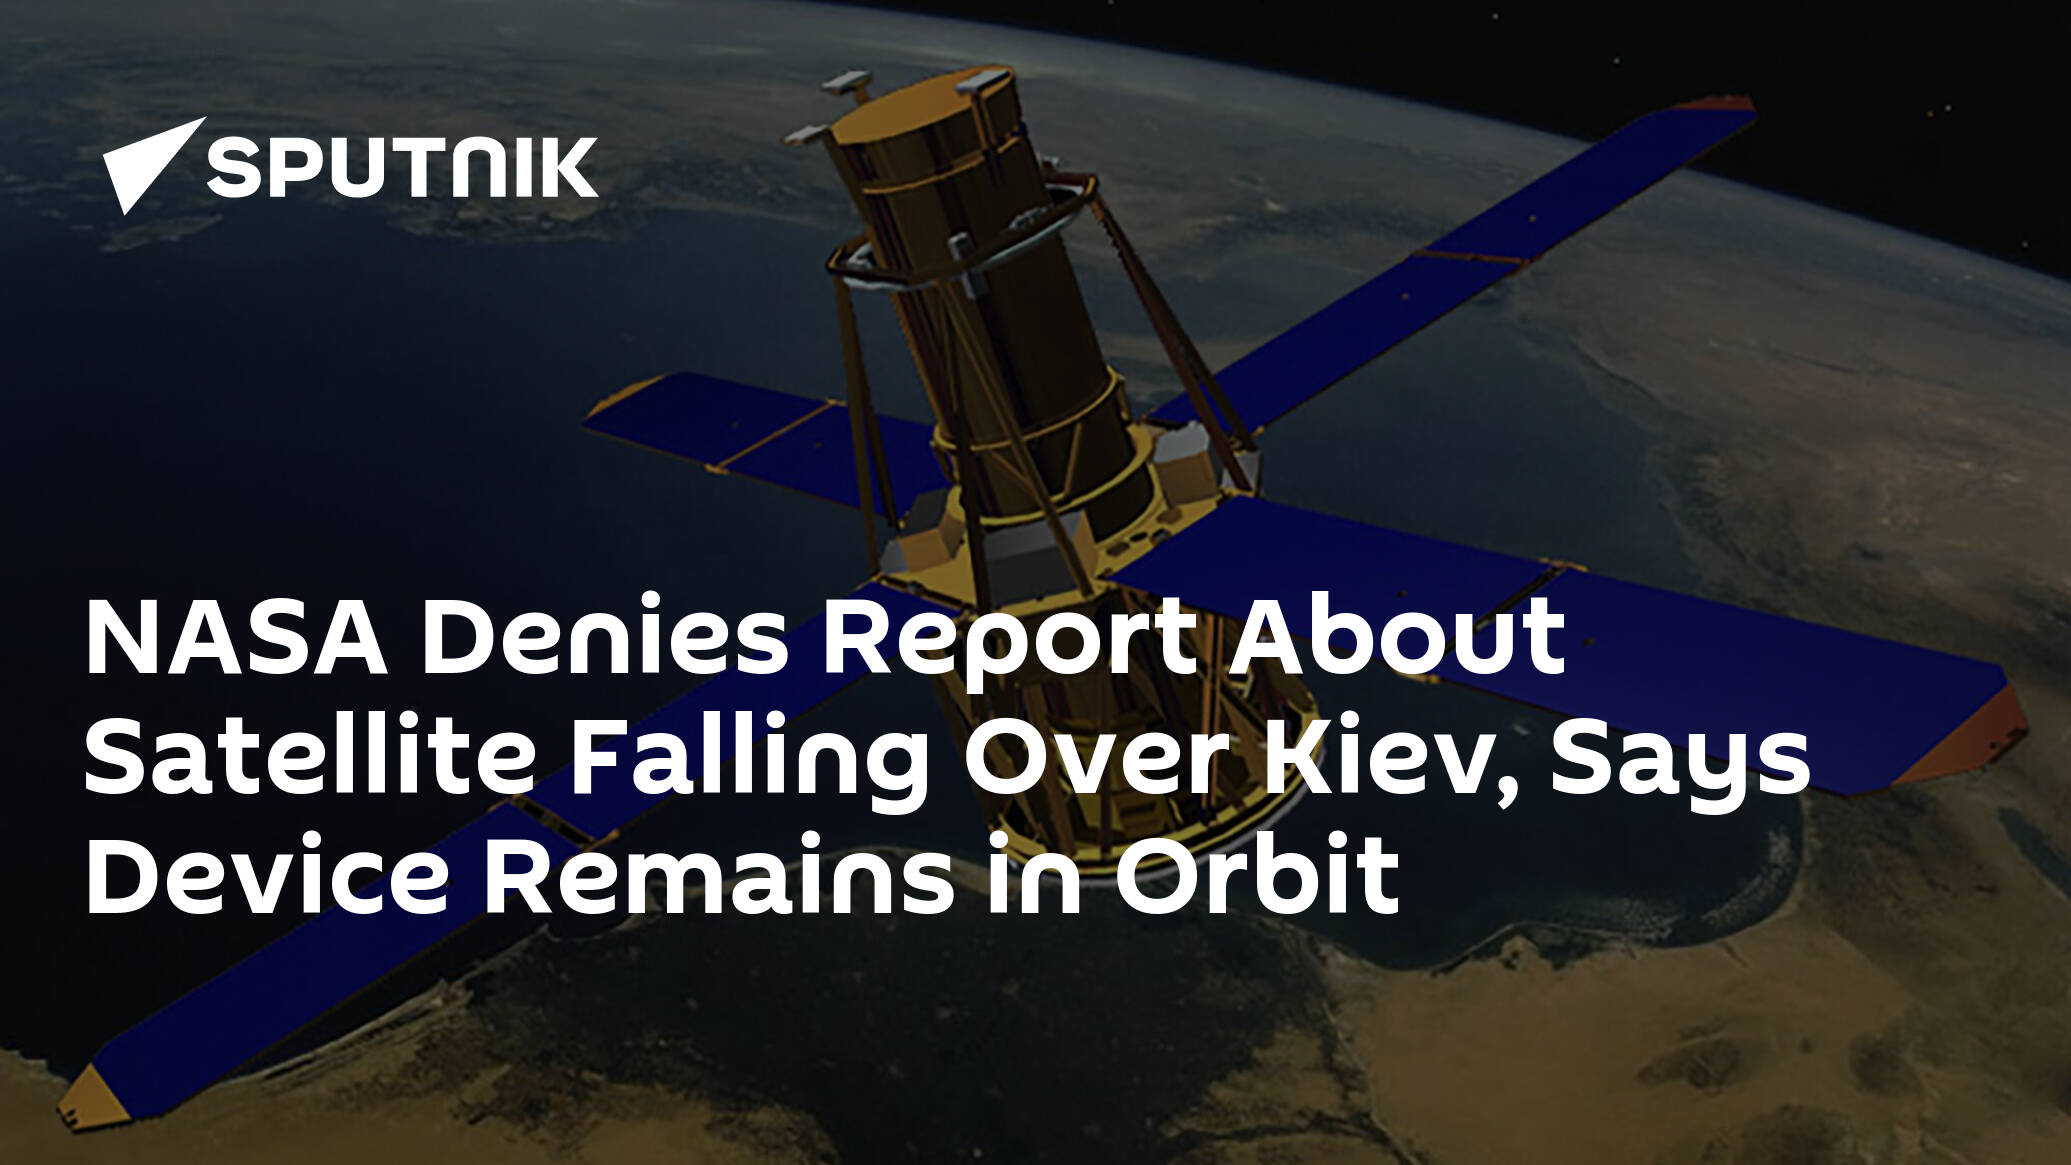 NASA Denies Report About Satellite Falling Over Kiev, Says Device Remains in Orbit